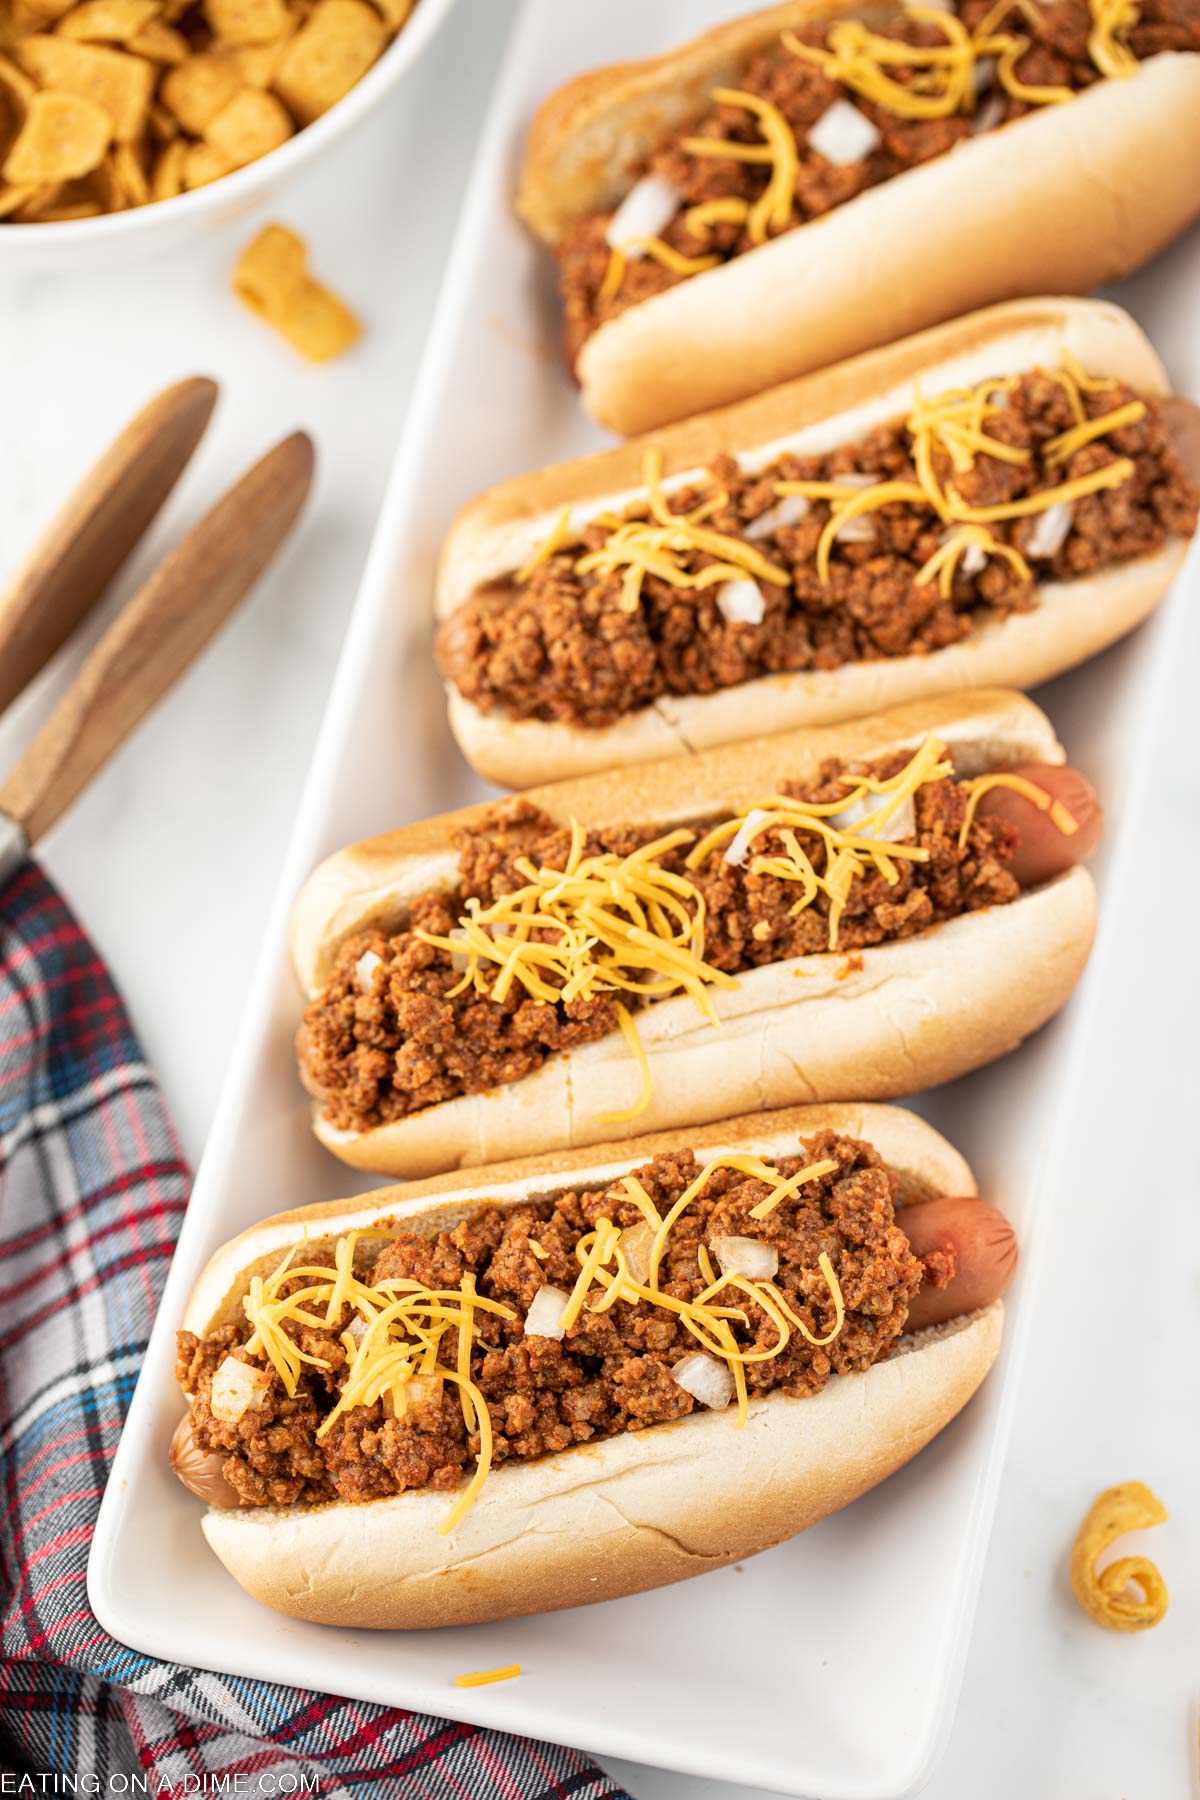 Hot dogs topped with chili, cheese, and onions on a platter